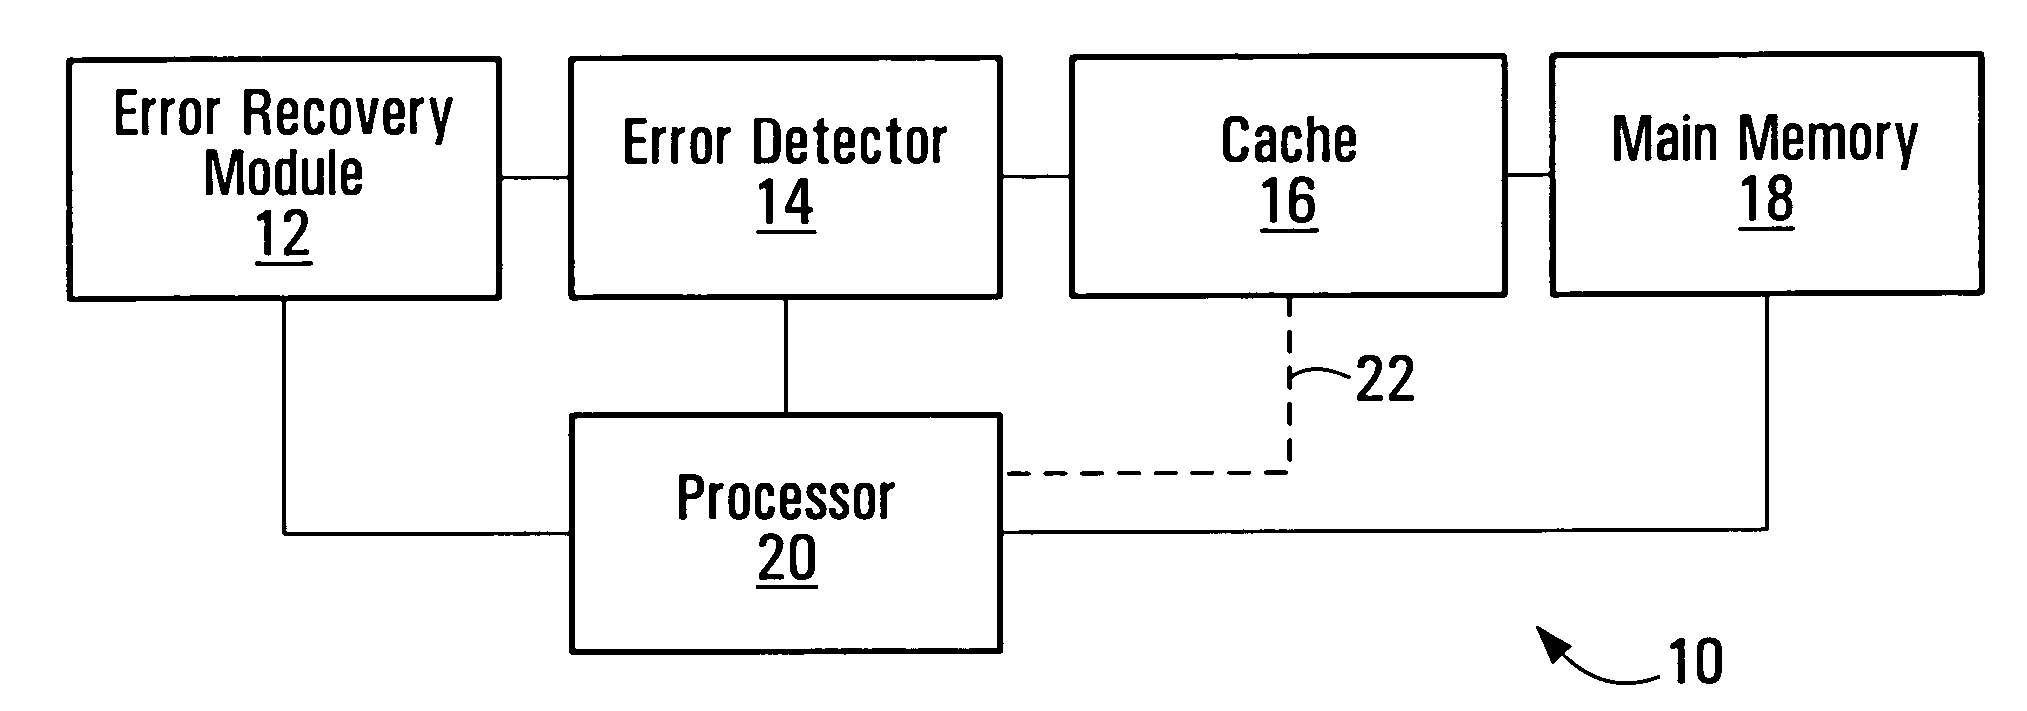 Information error recovery apparatus and methods